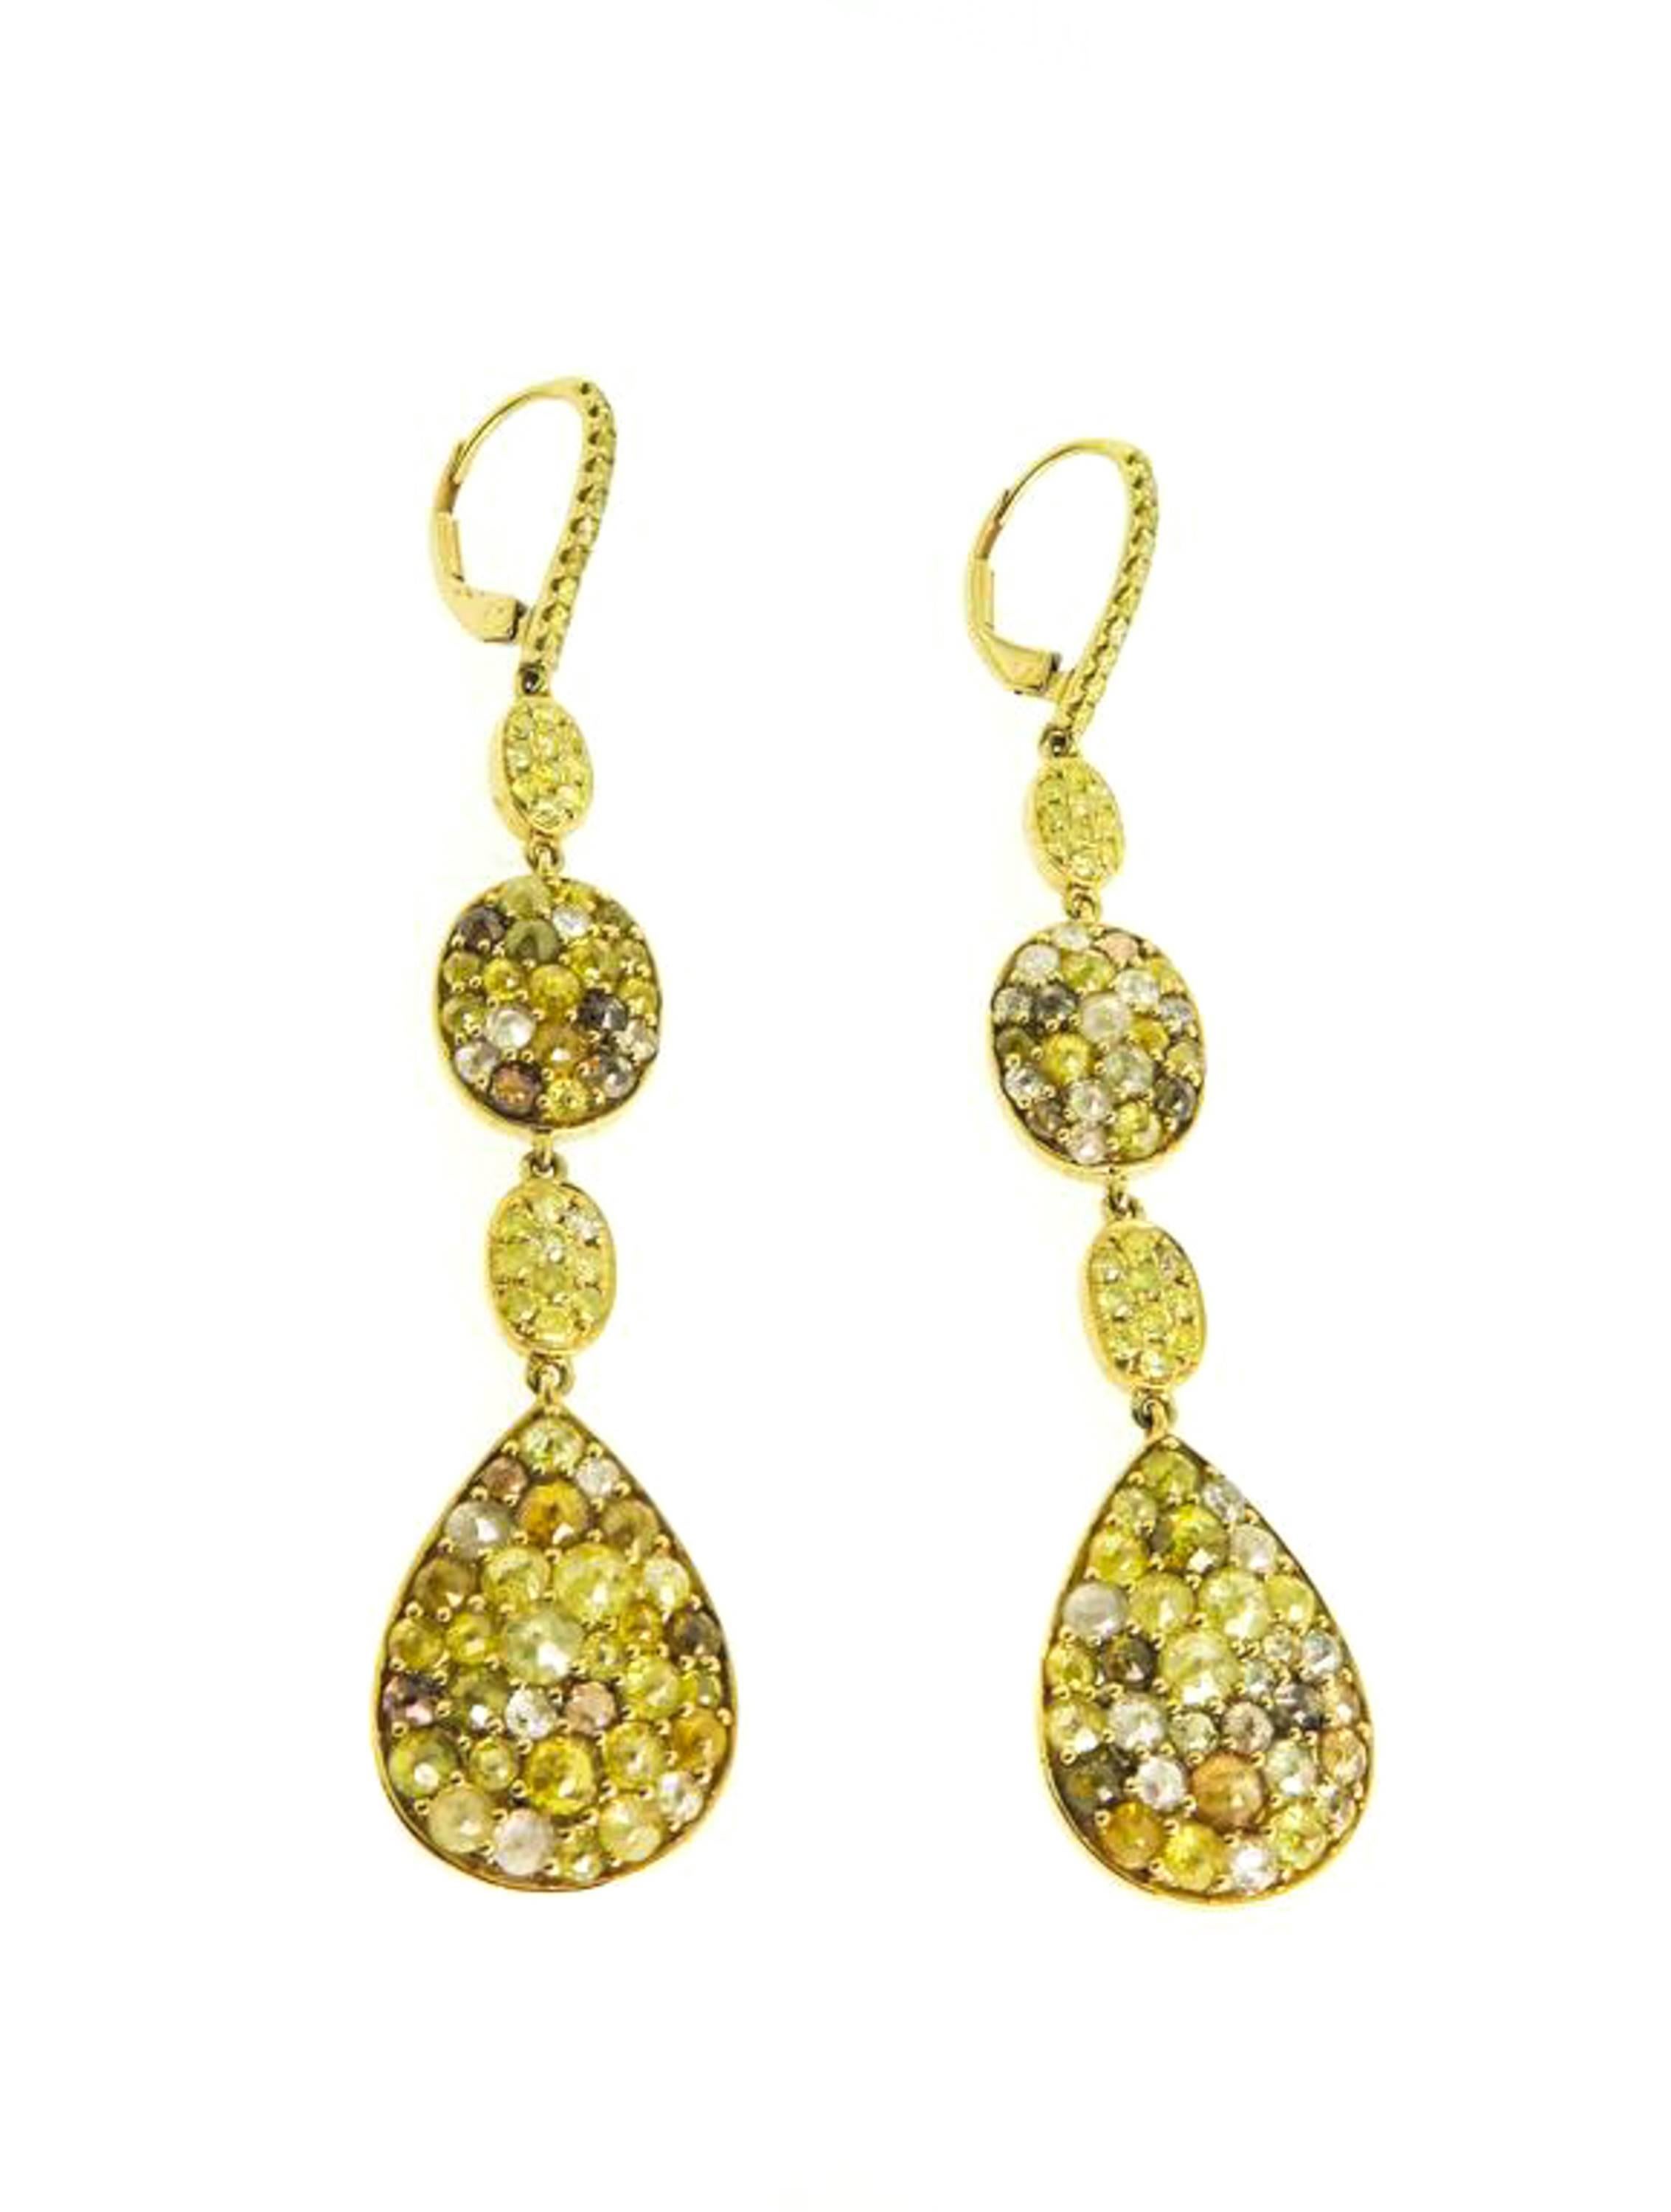 These artistically designed and  fascinating earrings embellish the enchanting radiance of the exceptionally shaped rose cut diamond with white, champagne and fancy yellow colored diamonds weighing in approximately 8.82 carats for a glamorous